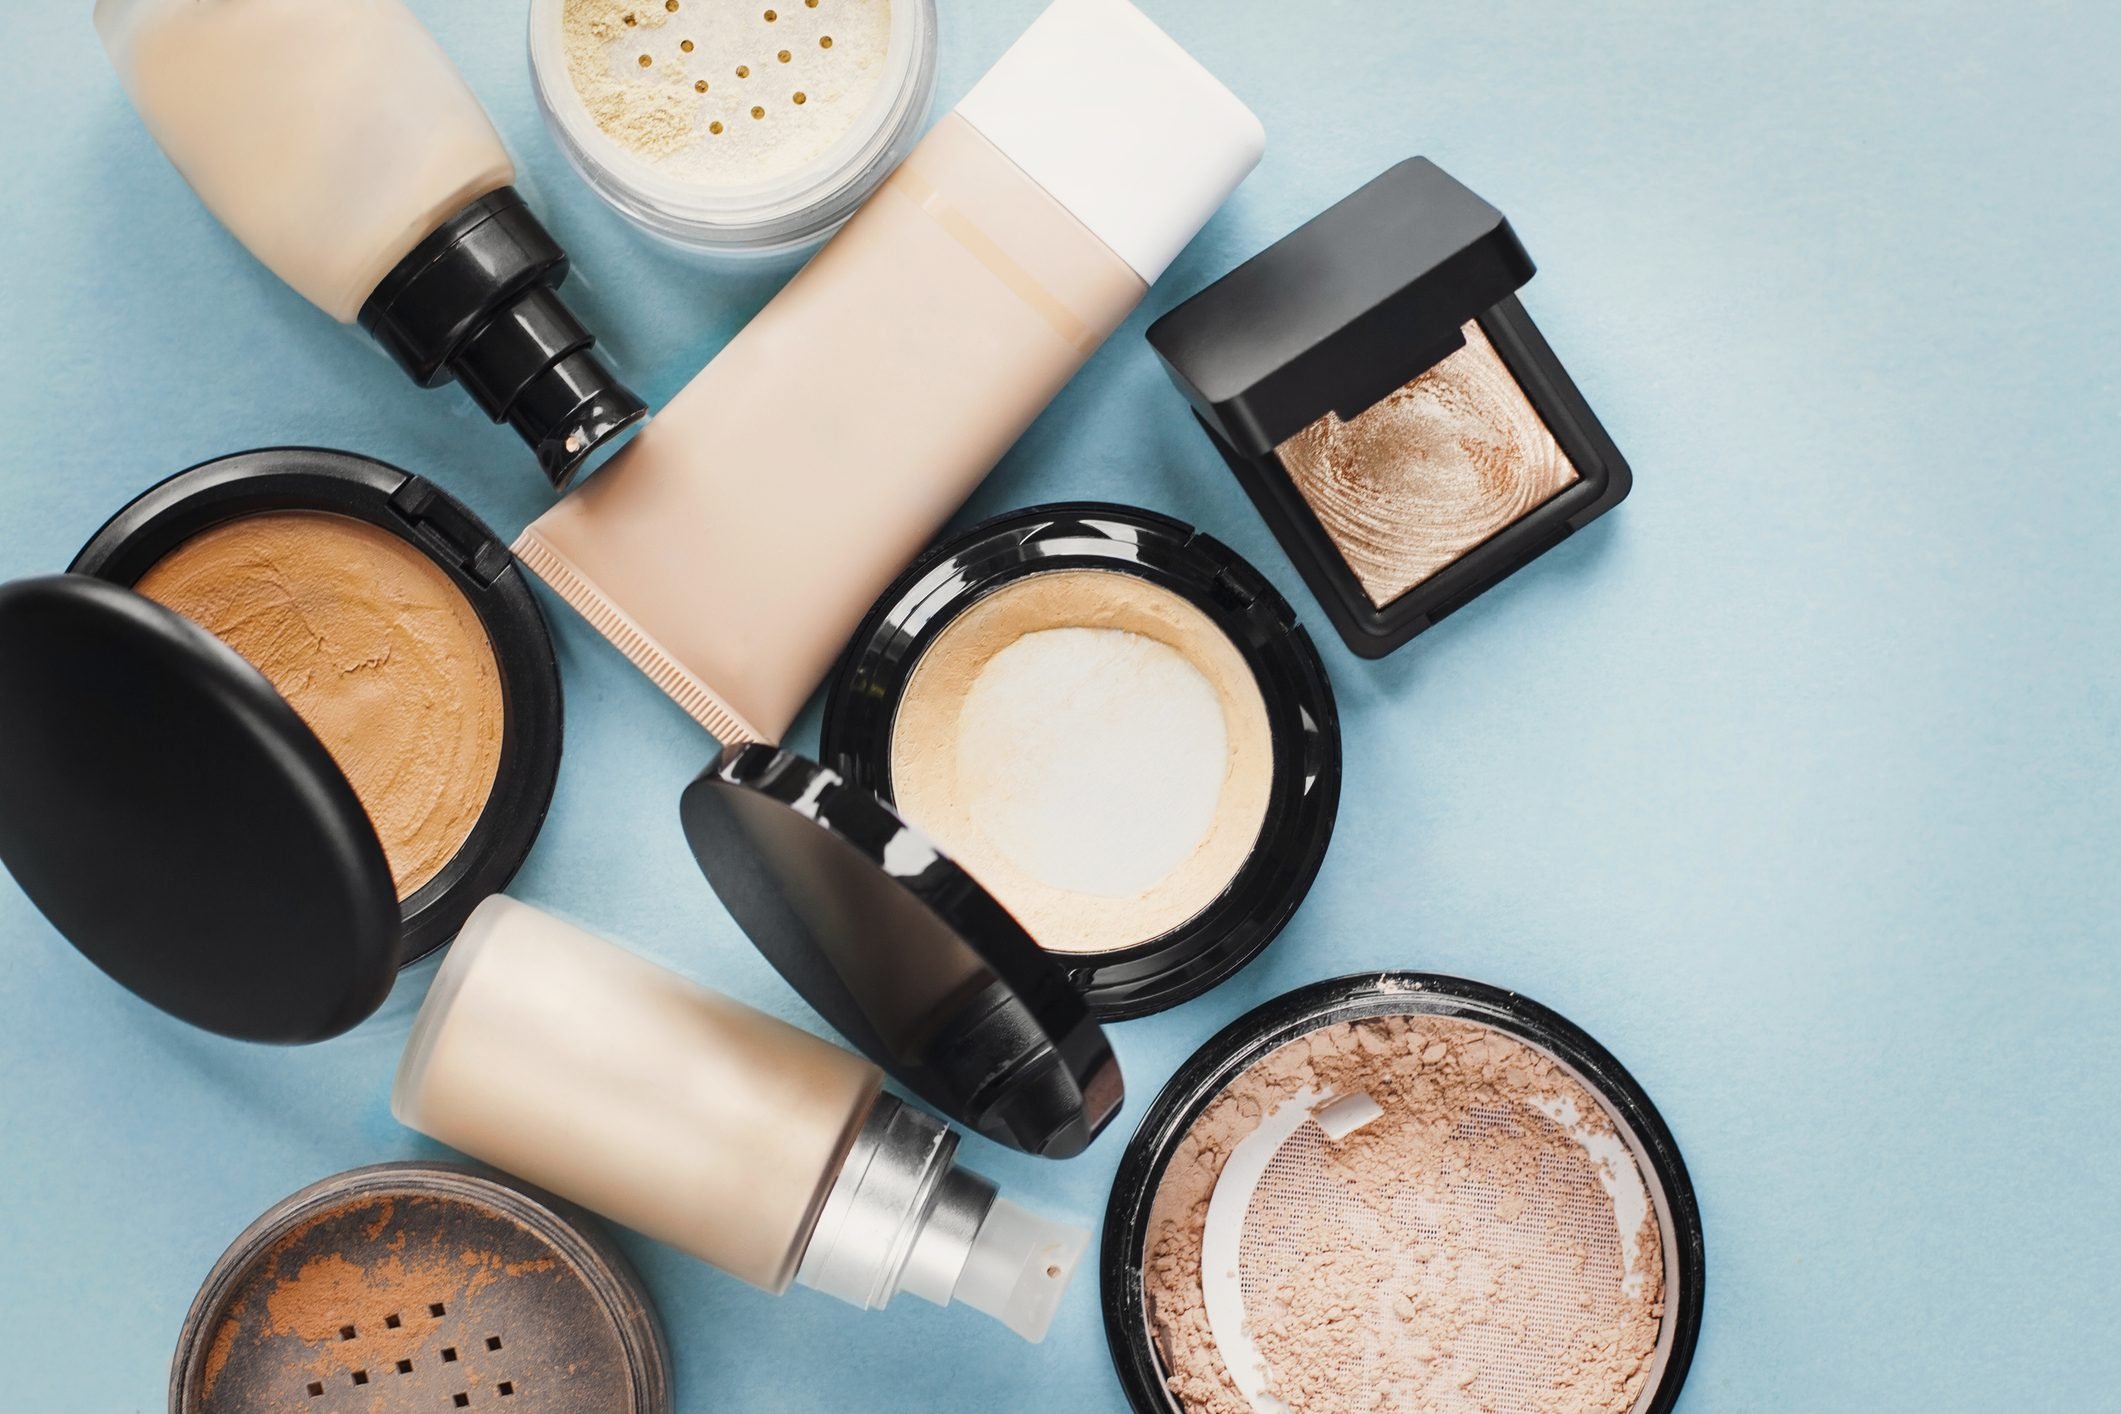 Why Is There Caffeine in My Skin Care Products?